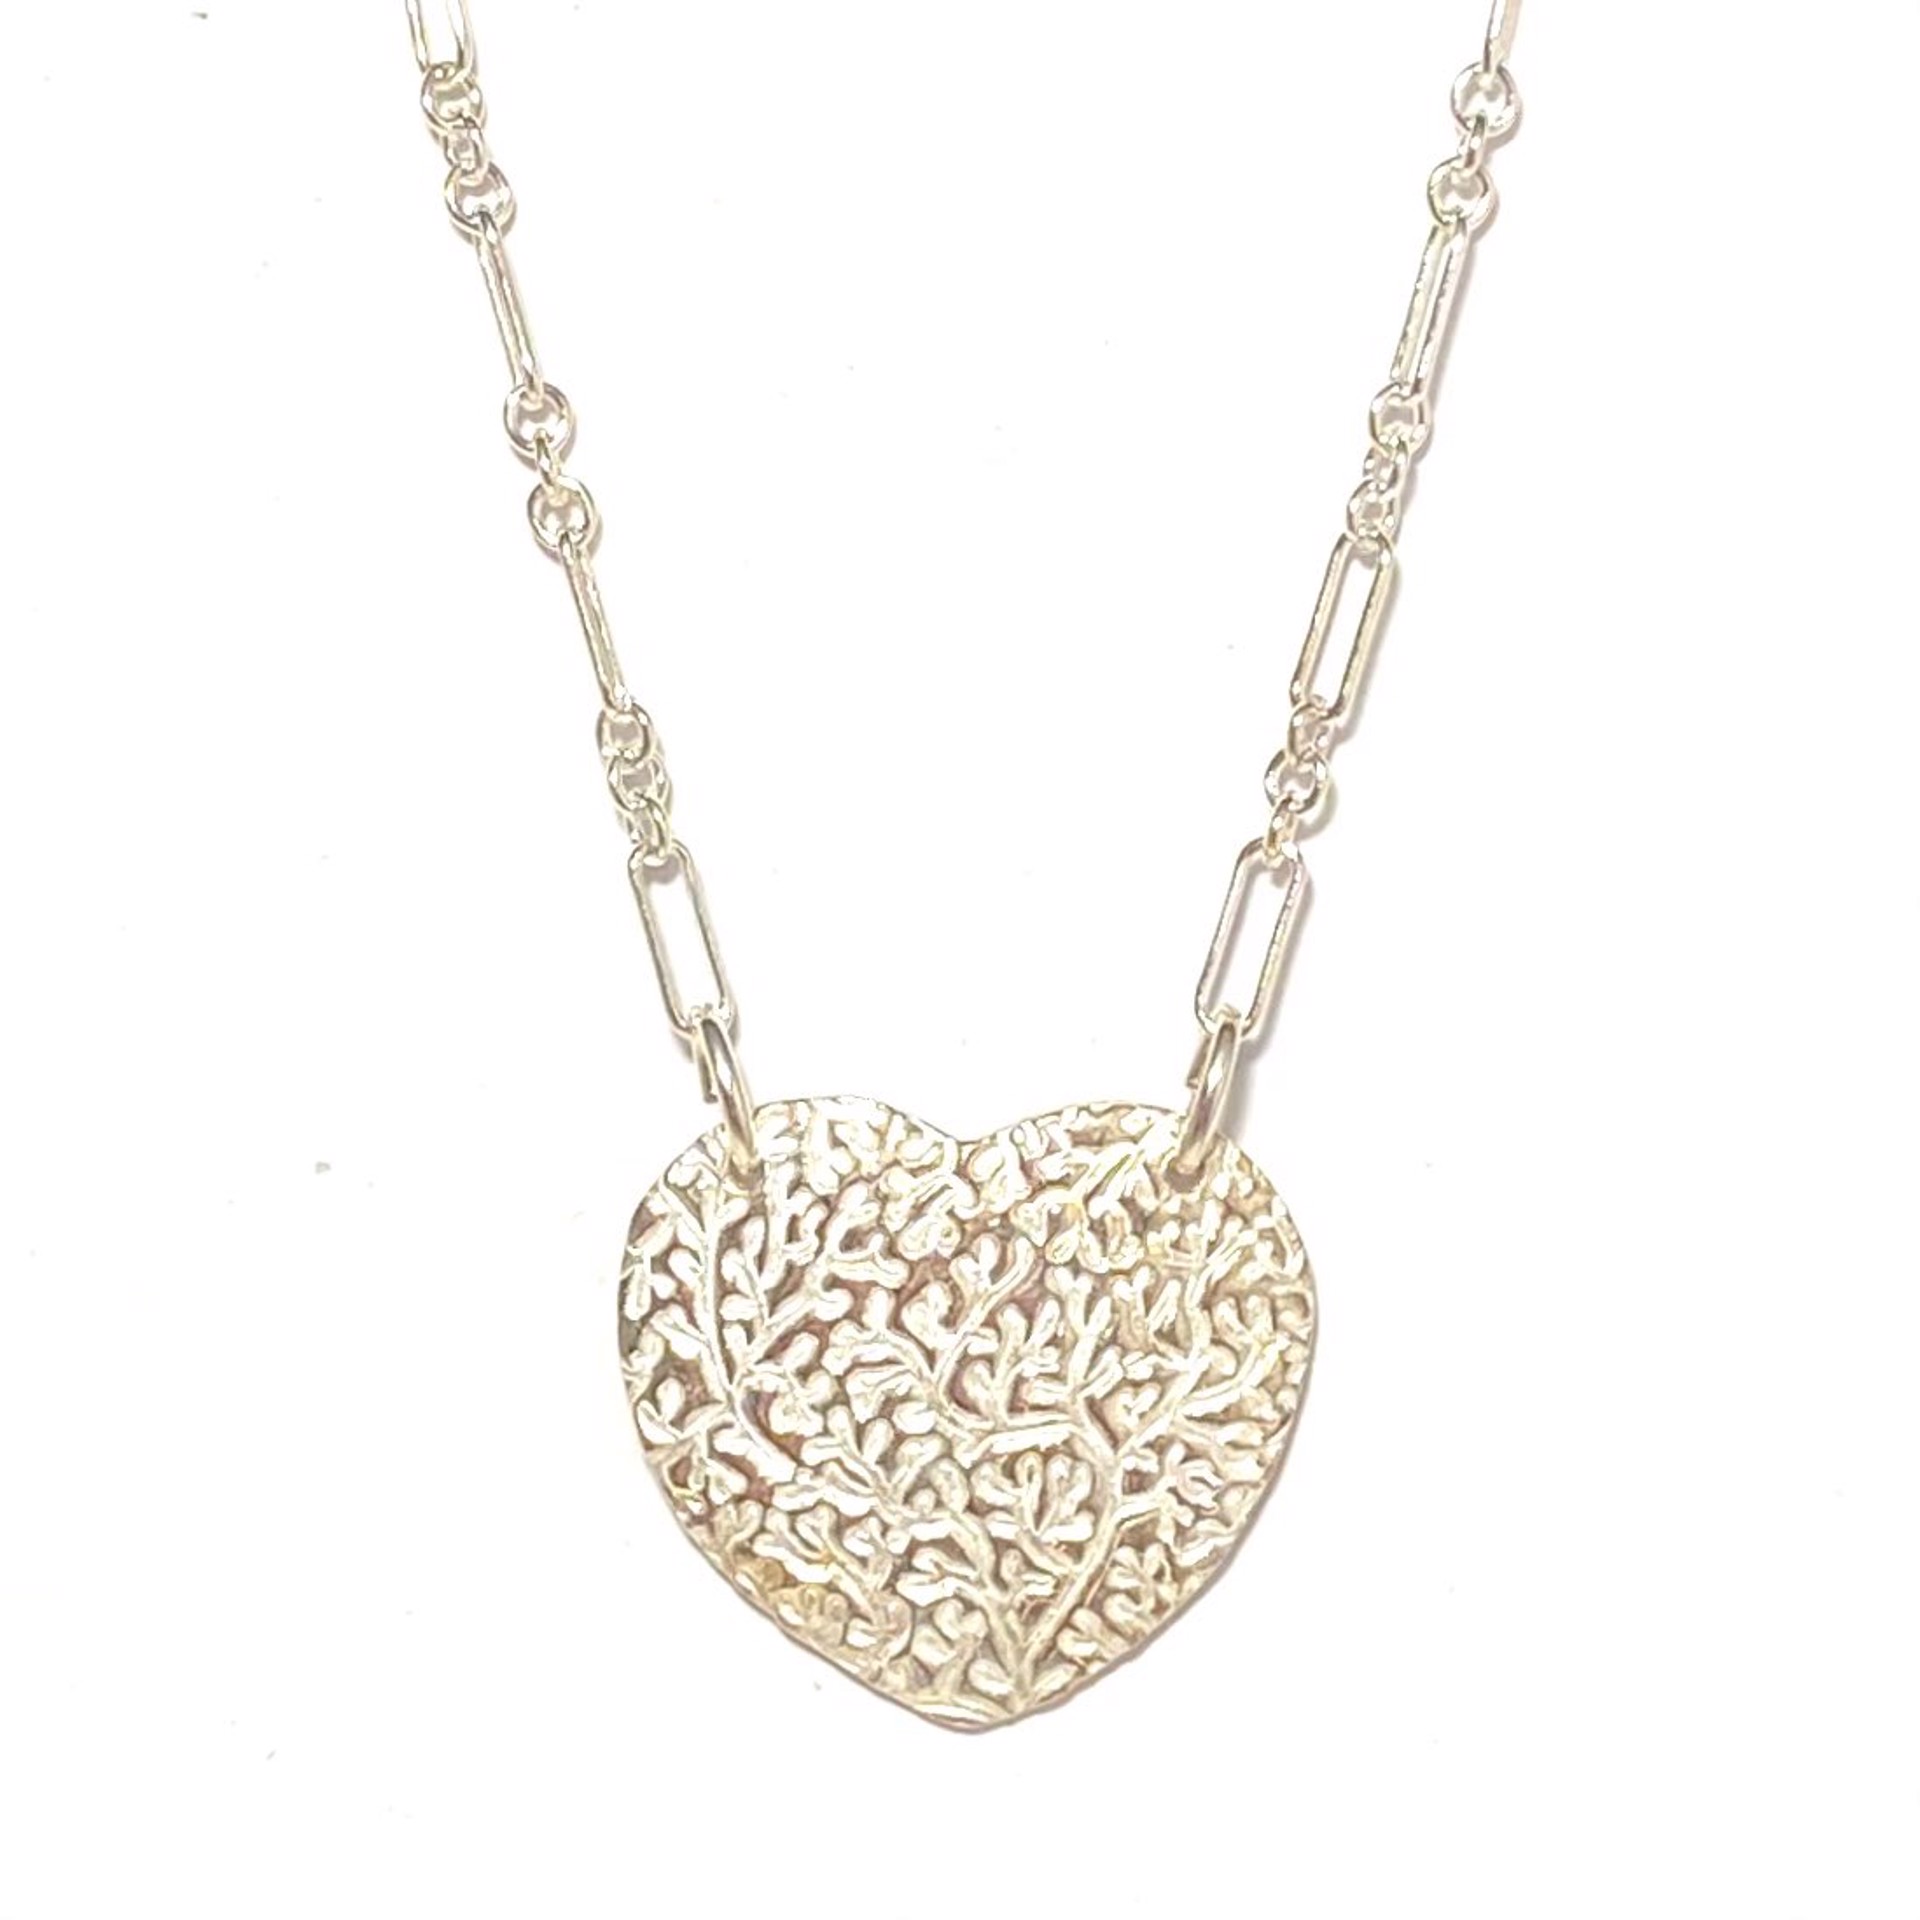 KH22-67 Fine Silver Rounded Heart 18"Silver Chain Necklace by Karen Hakim